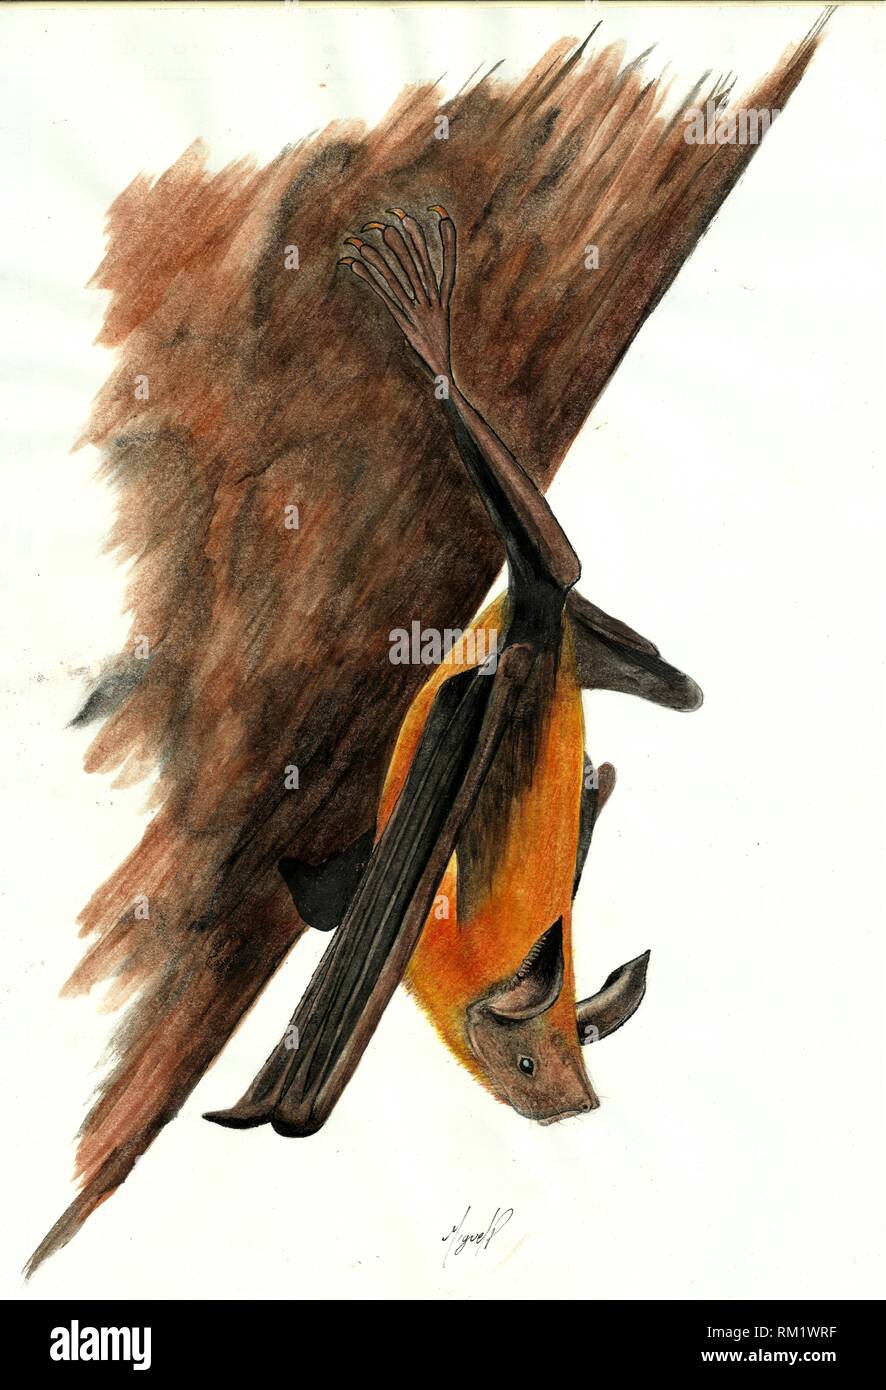 illustration of a Noctilio leporinus, made in colored pencils by hand. Stock Photo